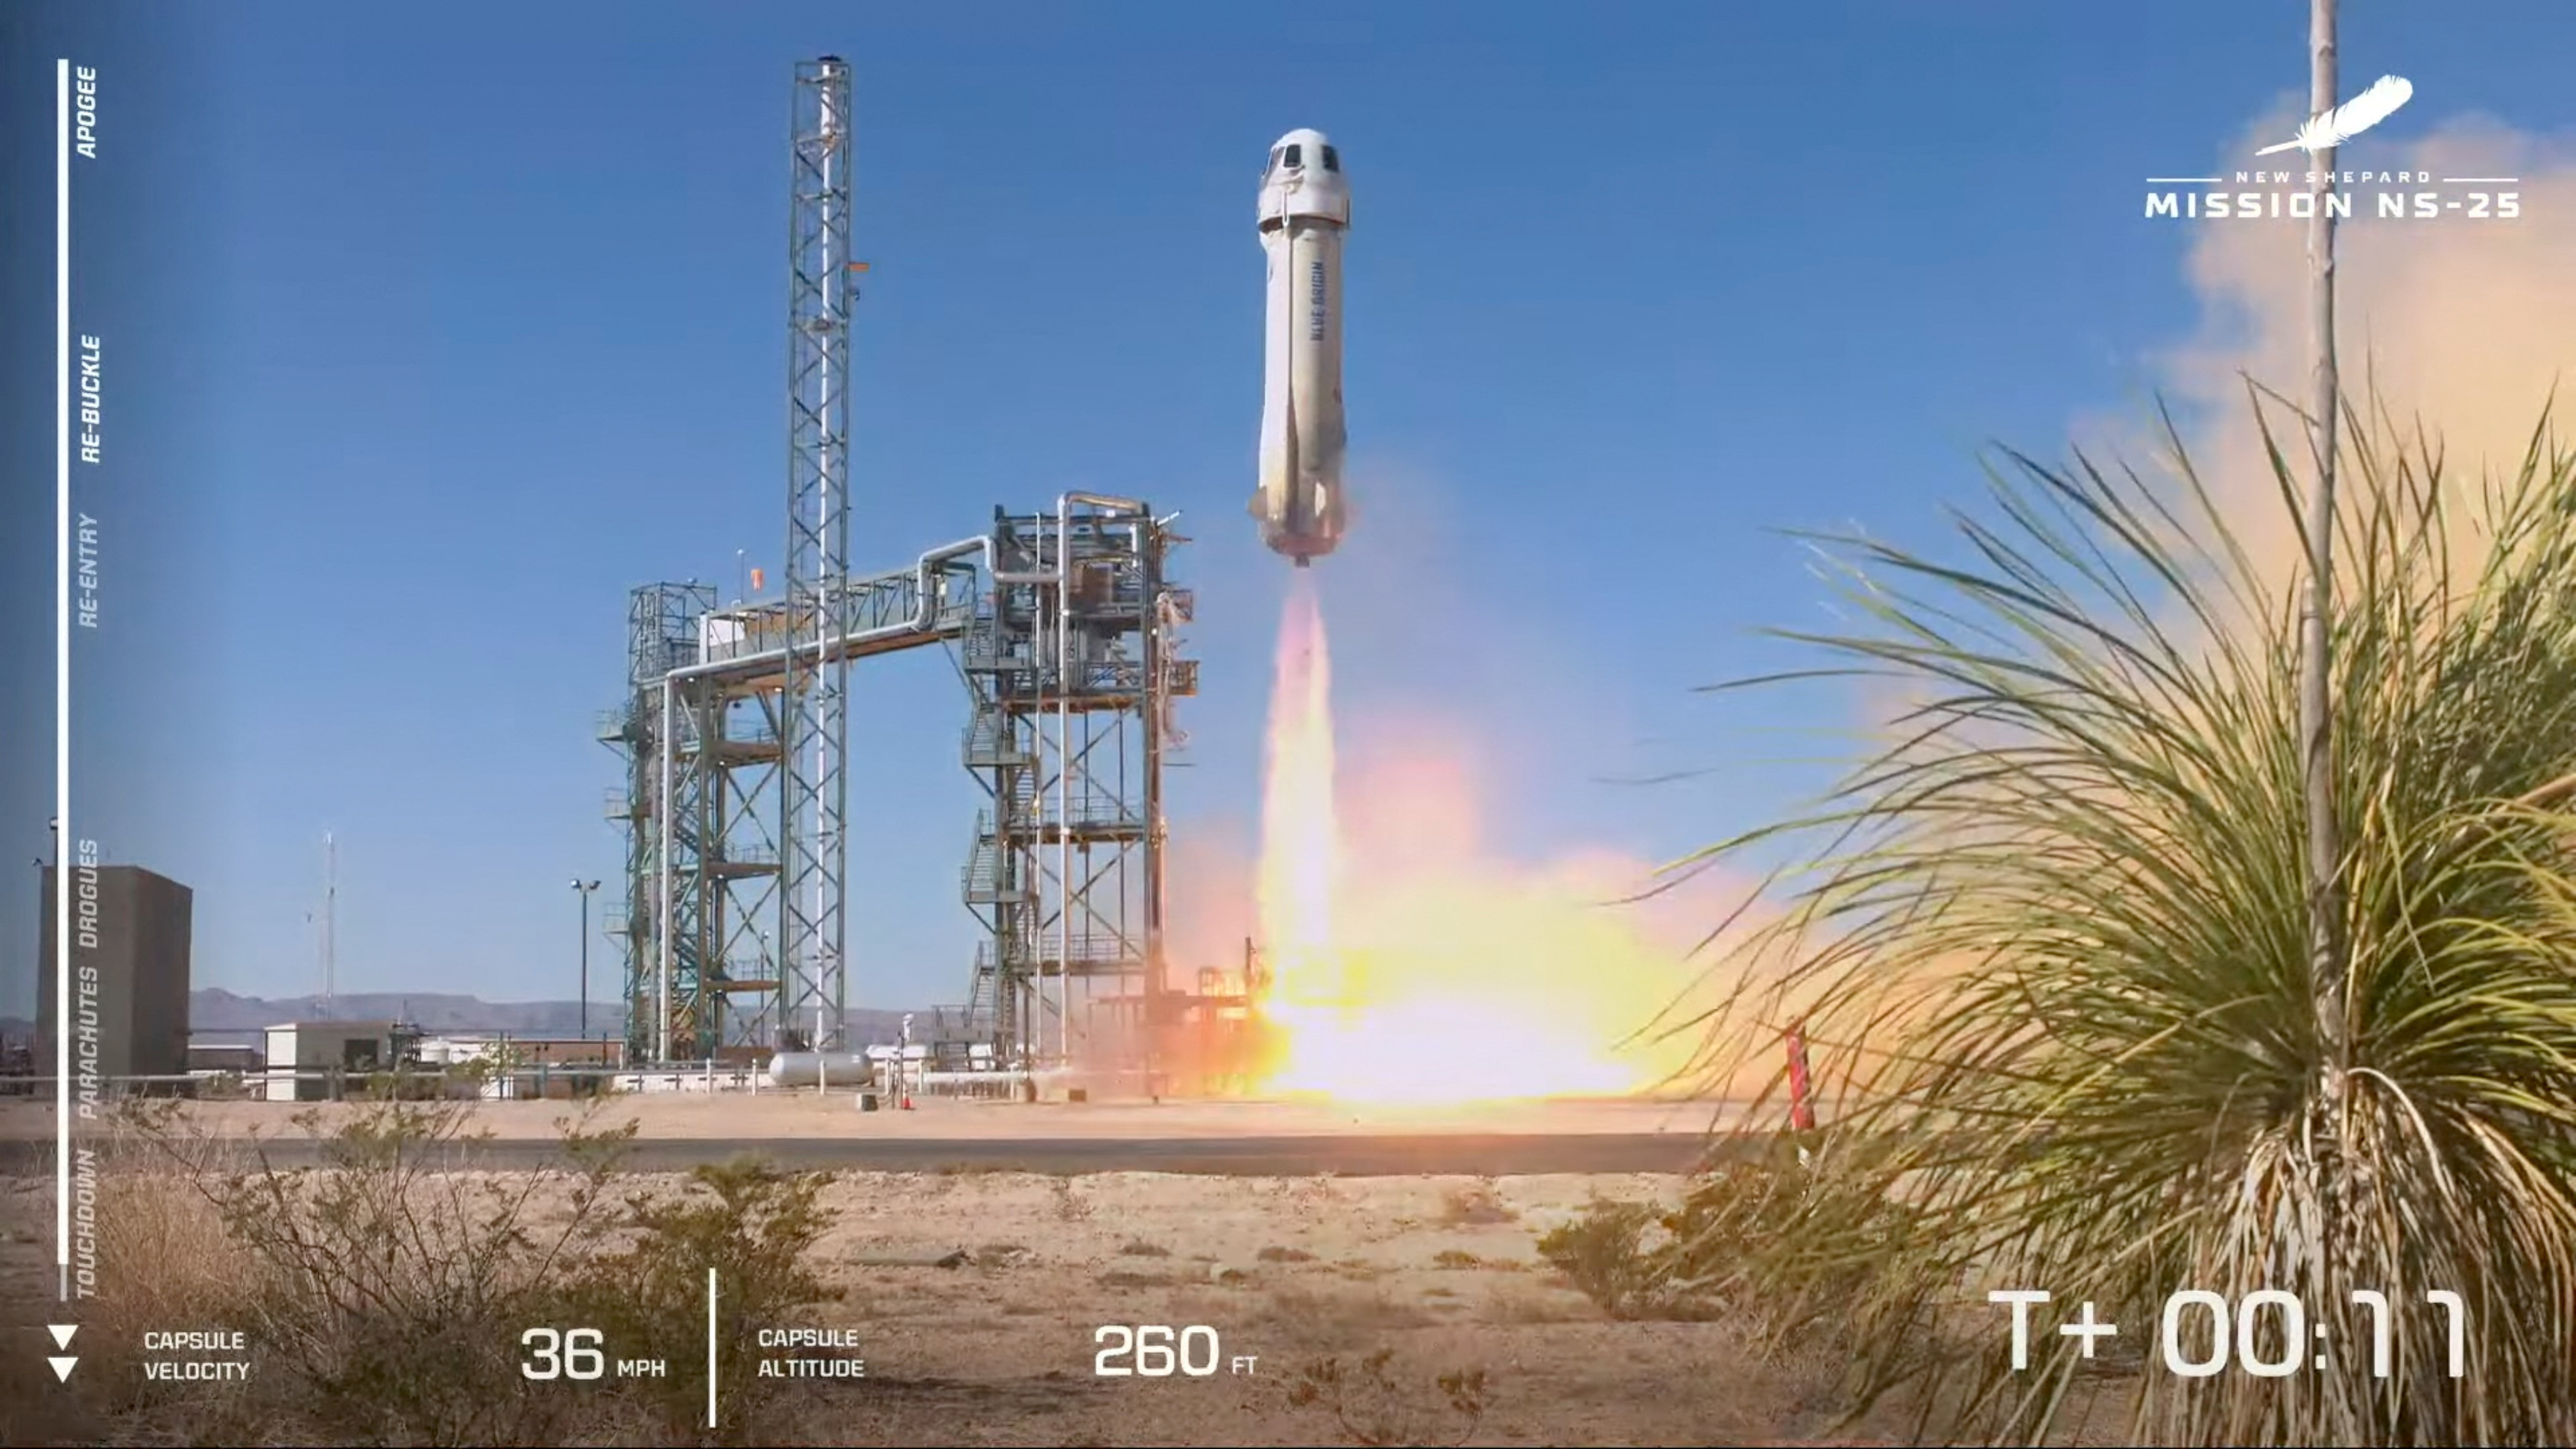 Jeff Bezos-backed Blue Origin resumes its flights to the edge of space